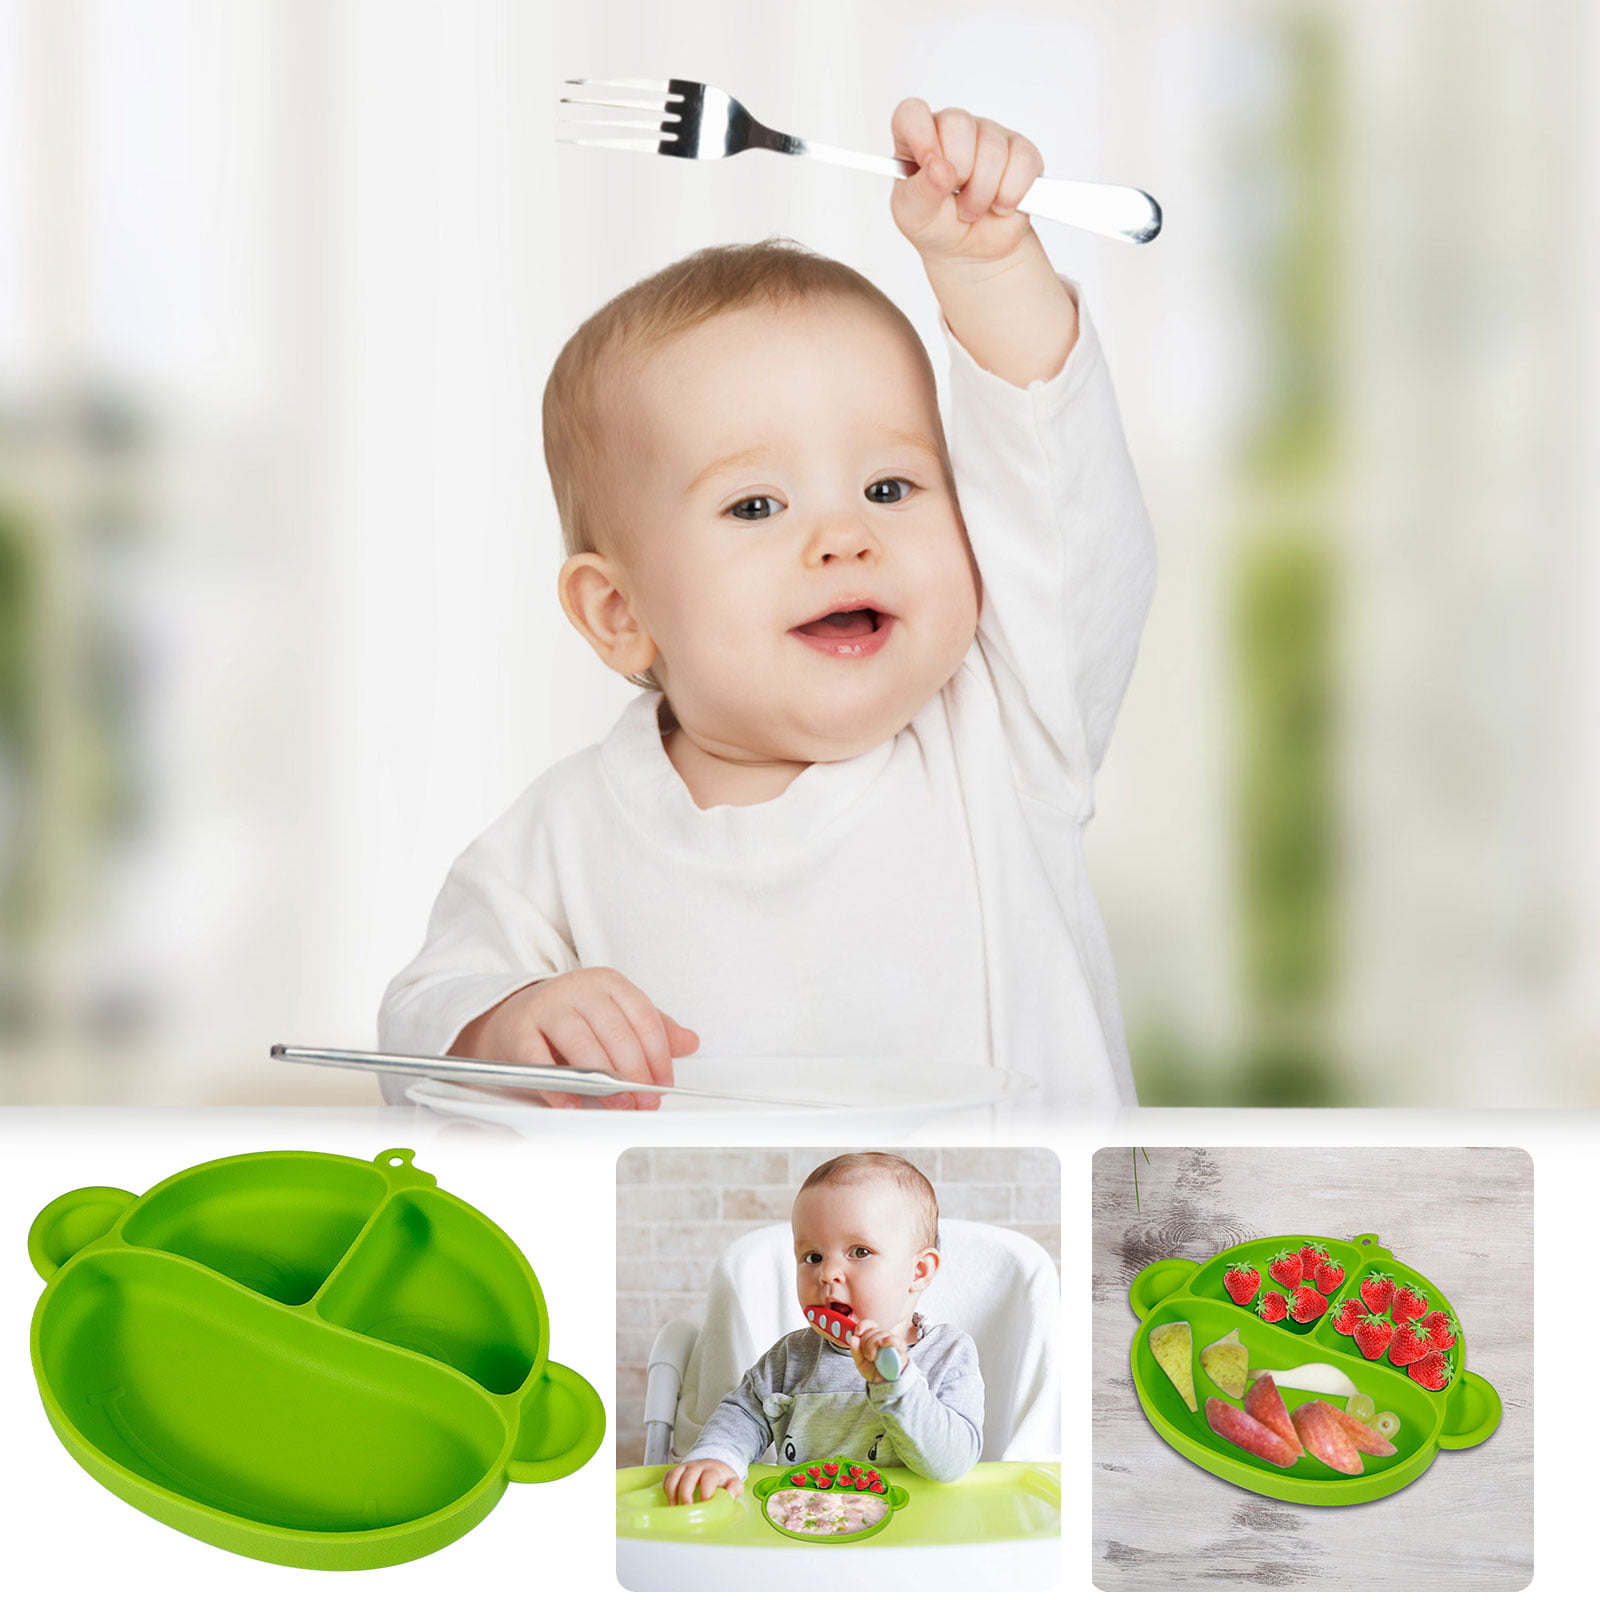 WeeSprout Suction Plates with Lids for Babies & Toddlers - 100% Silicone, Plates Stay Put with Suction Feature, Divided Design, Microwave, Dishwasher